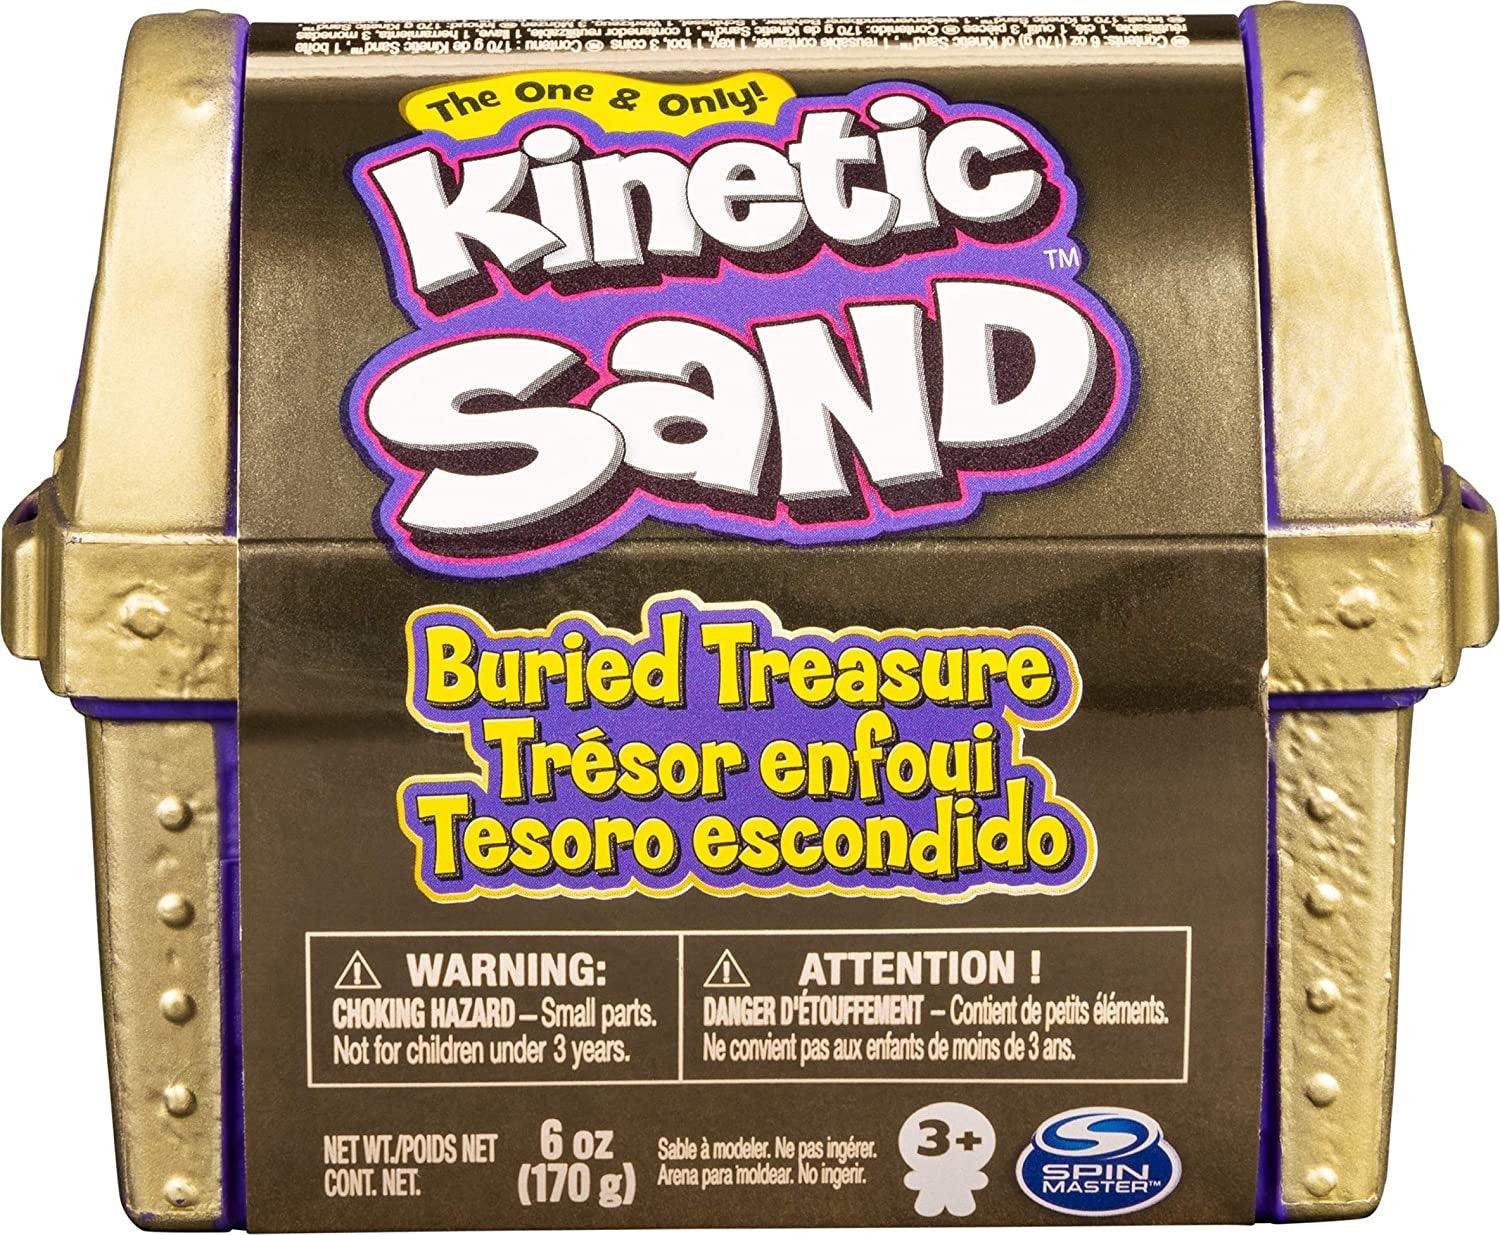 Buried Treasure Playset with 6oz of Kinetic Sand and Surprise Hidden Tool (Style May Vary)